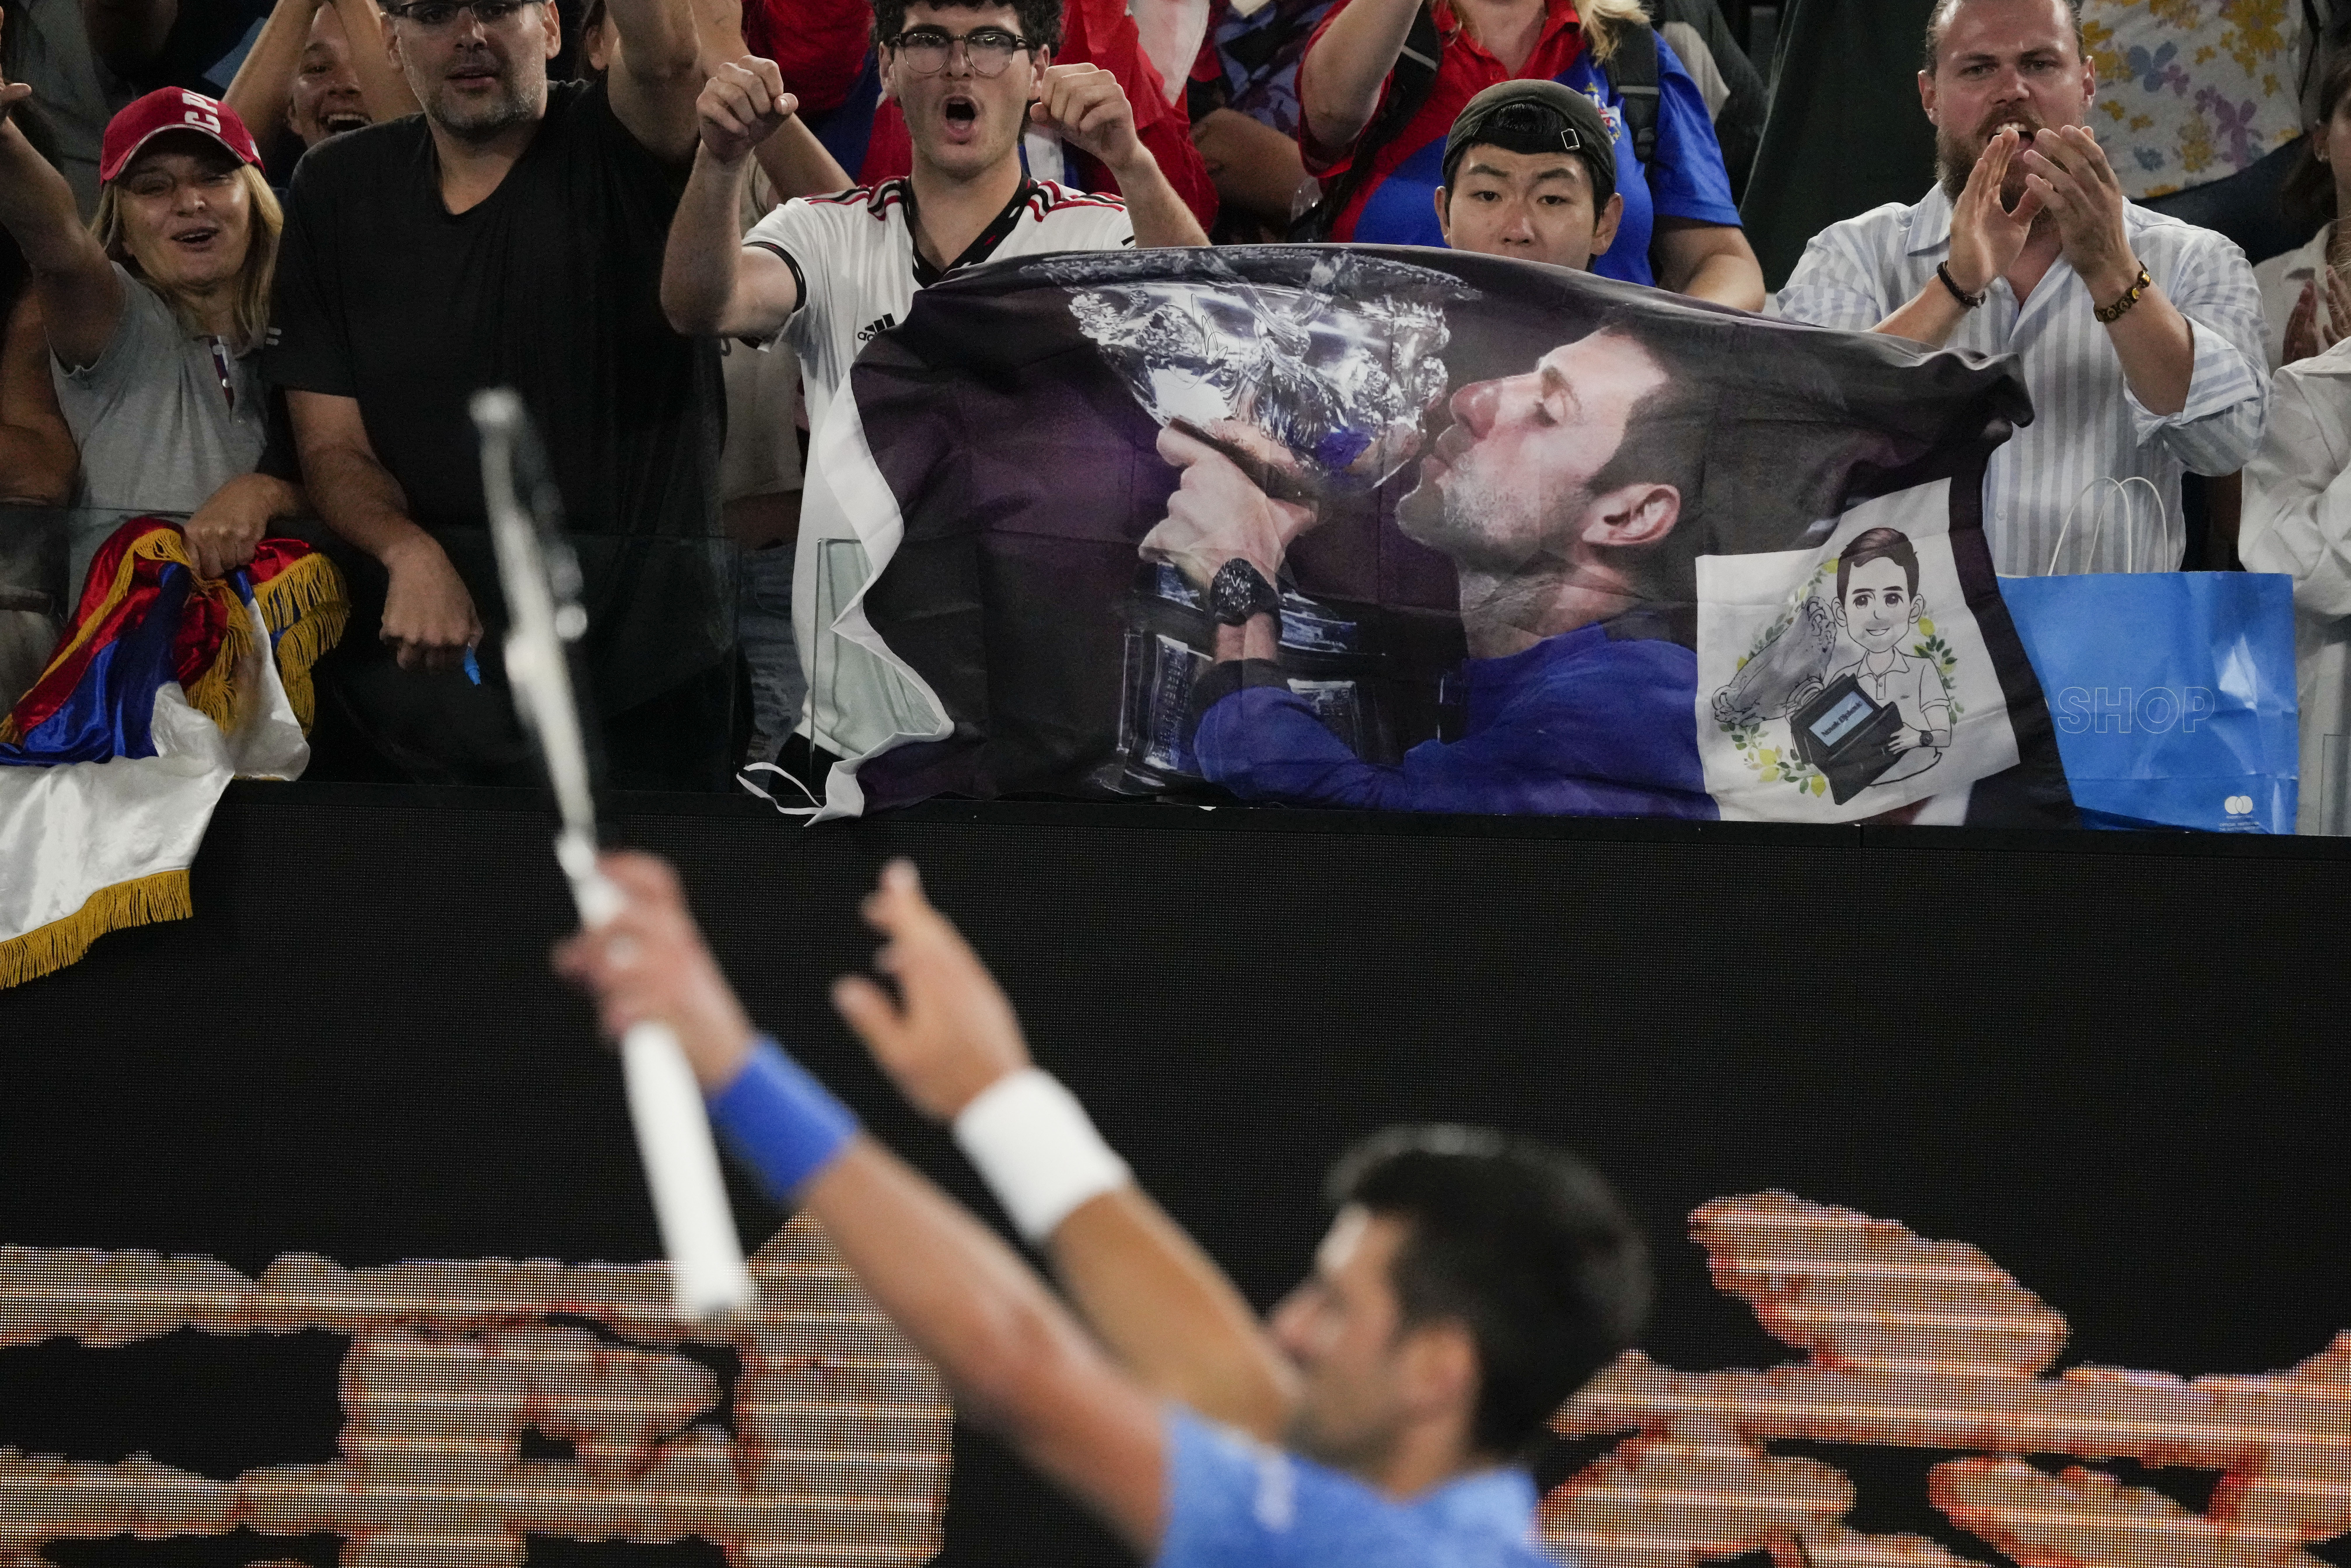 Novak Djokovic greets the crowd after beating Roberto Carballés Baena in the first round of the Australian Open, Wednesday, January 18, 2023, in Melbourne.  (AP Photo/Aaron Favila)